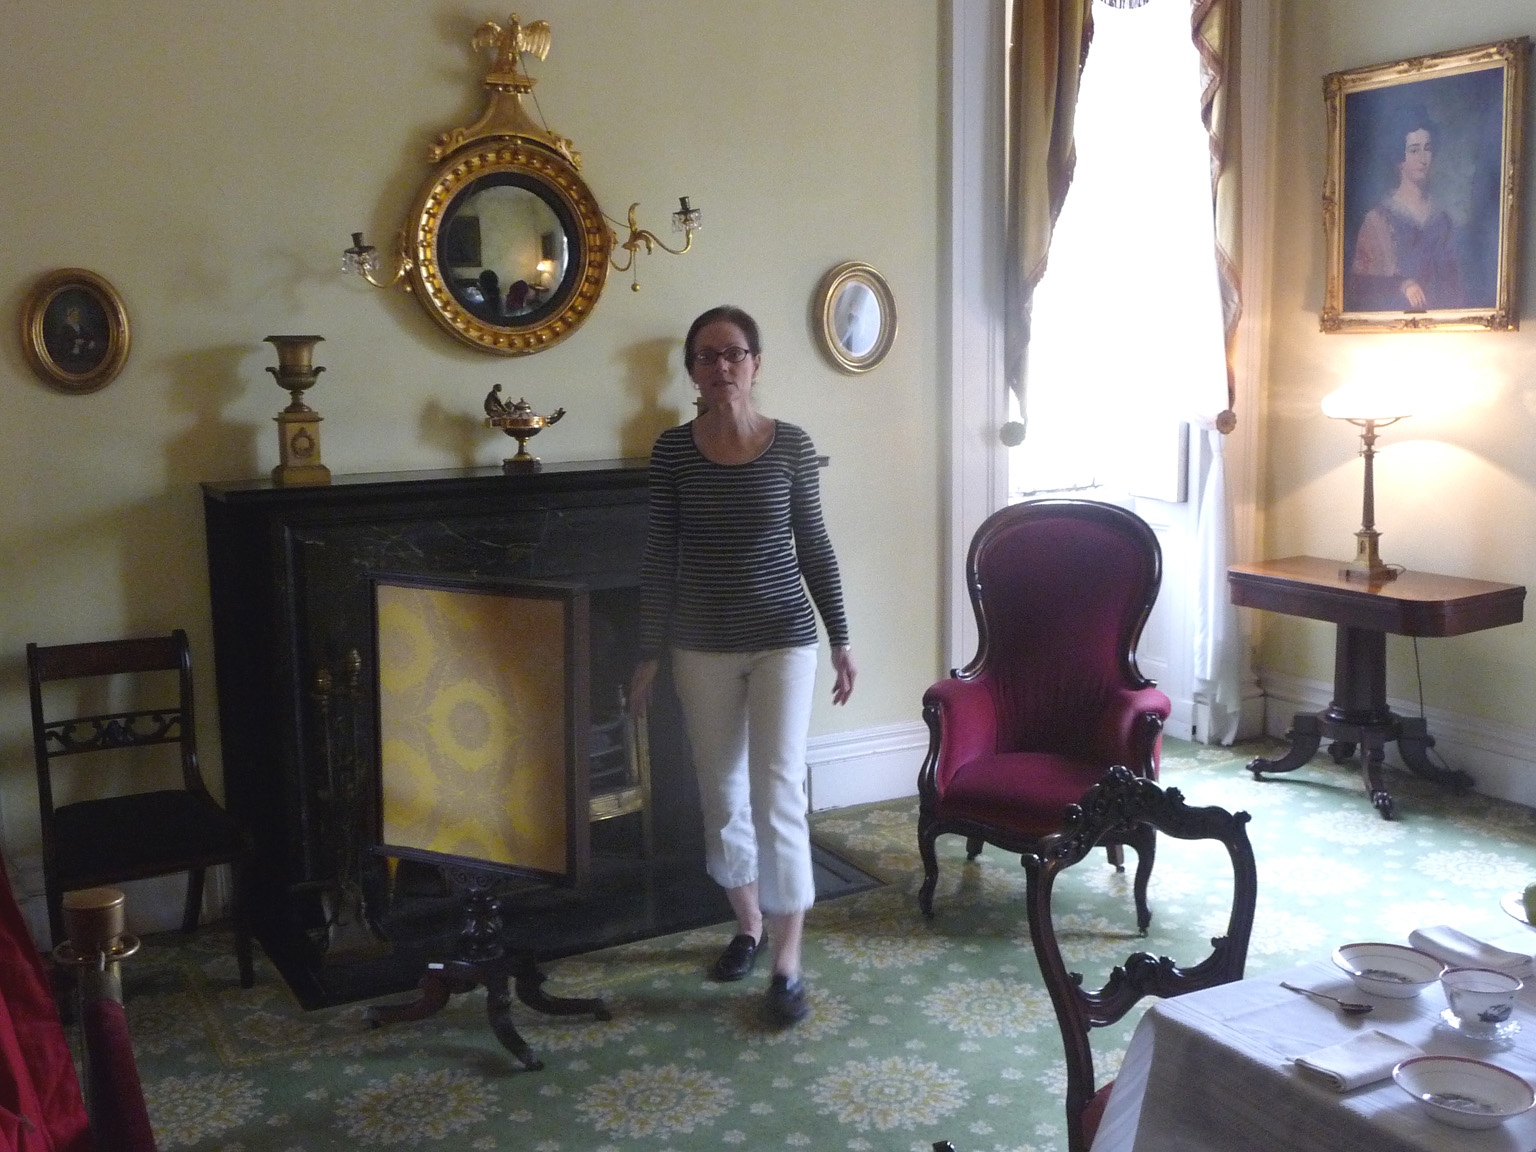 Our guide showing some of the exquisite 19th century furnishings in the more-casual sitting room.